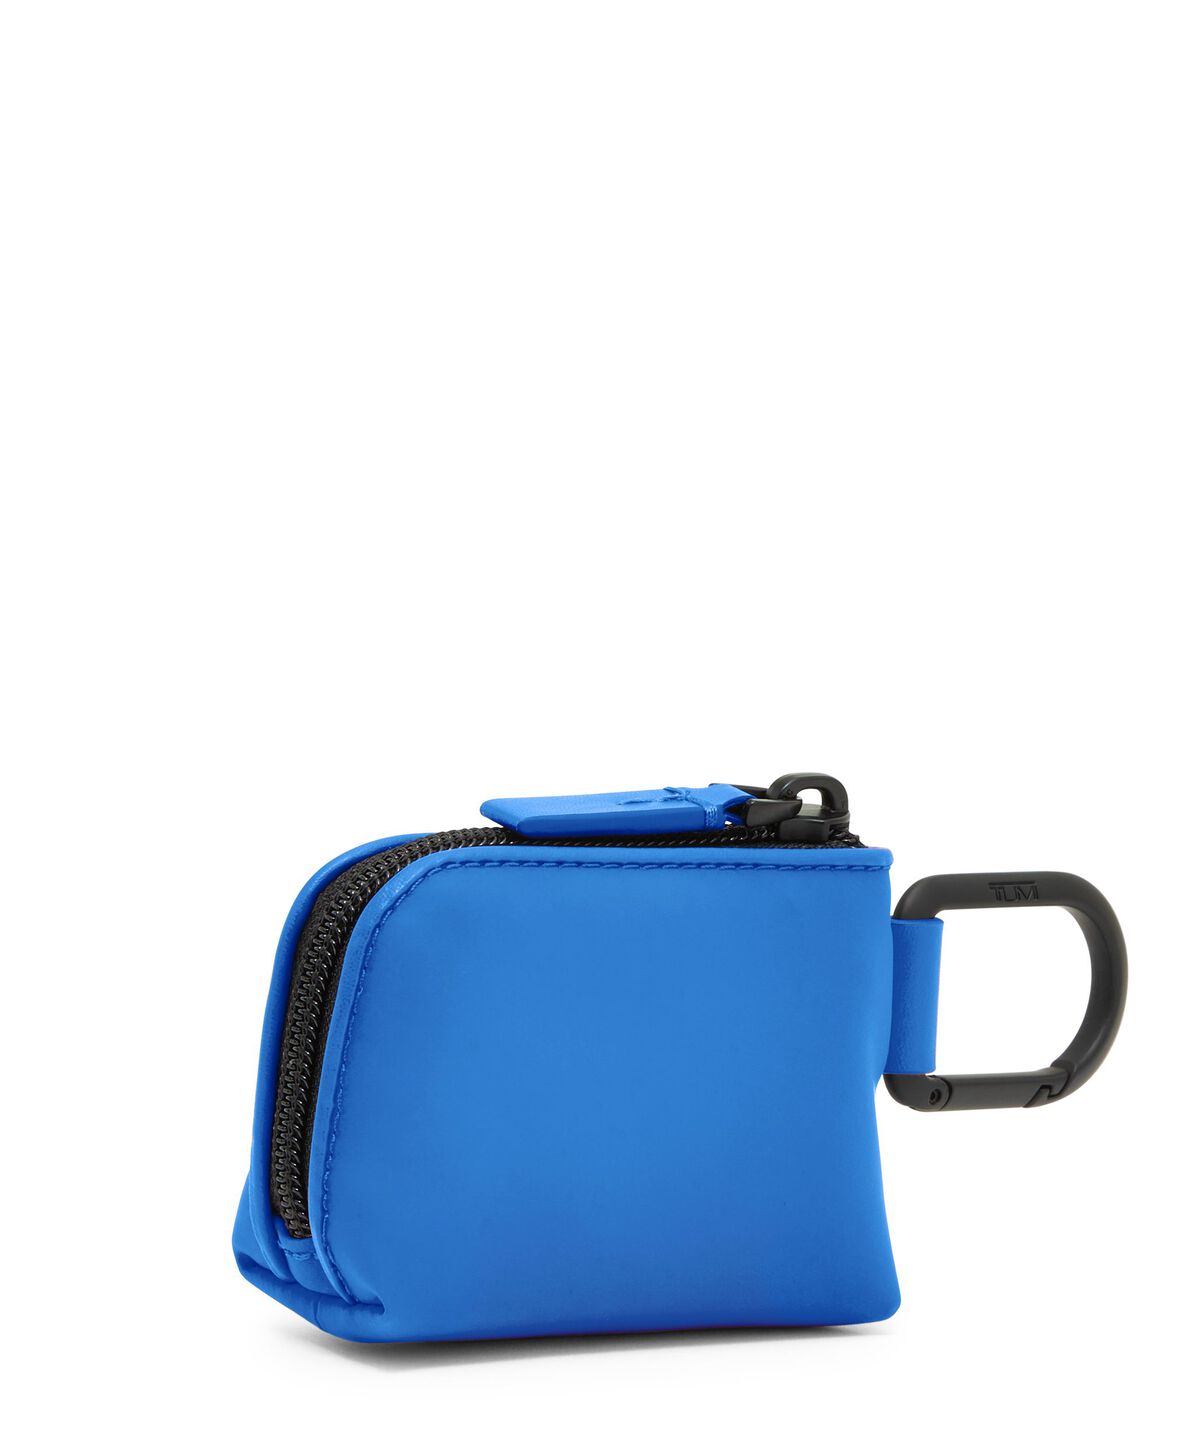 Tumi Travel Accessory EXTRA SMALL POUCH  Lapis Blue